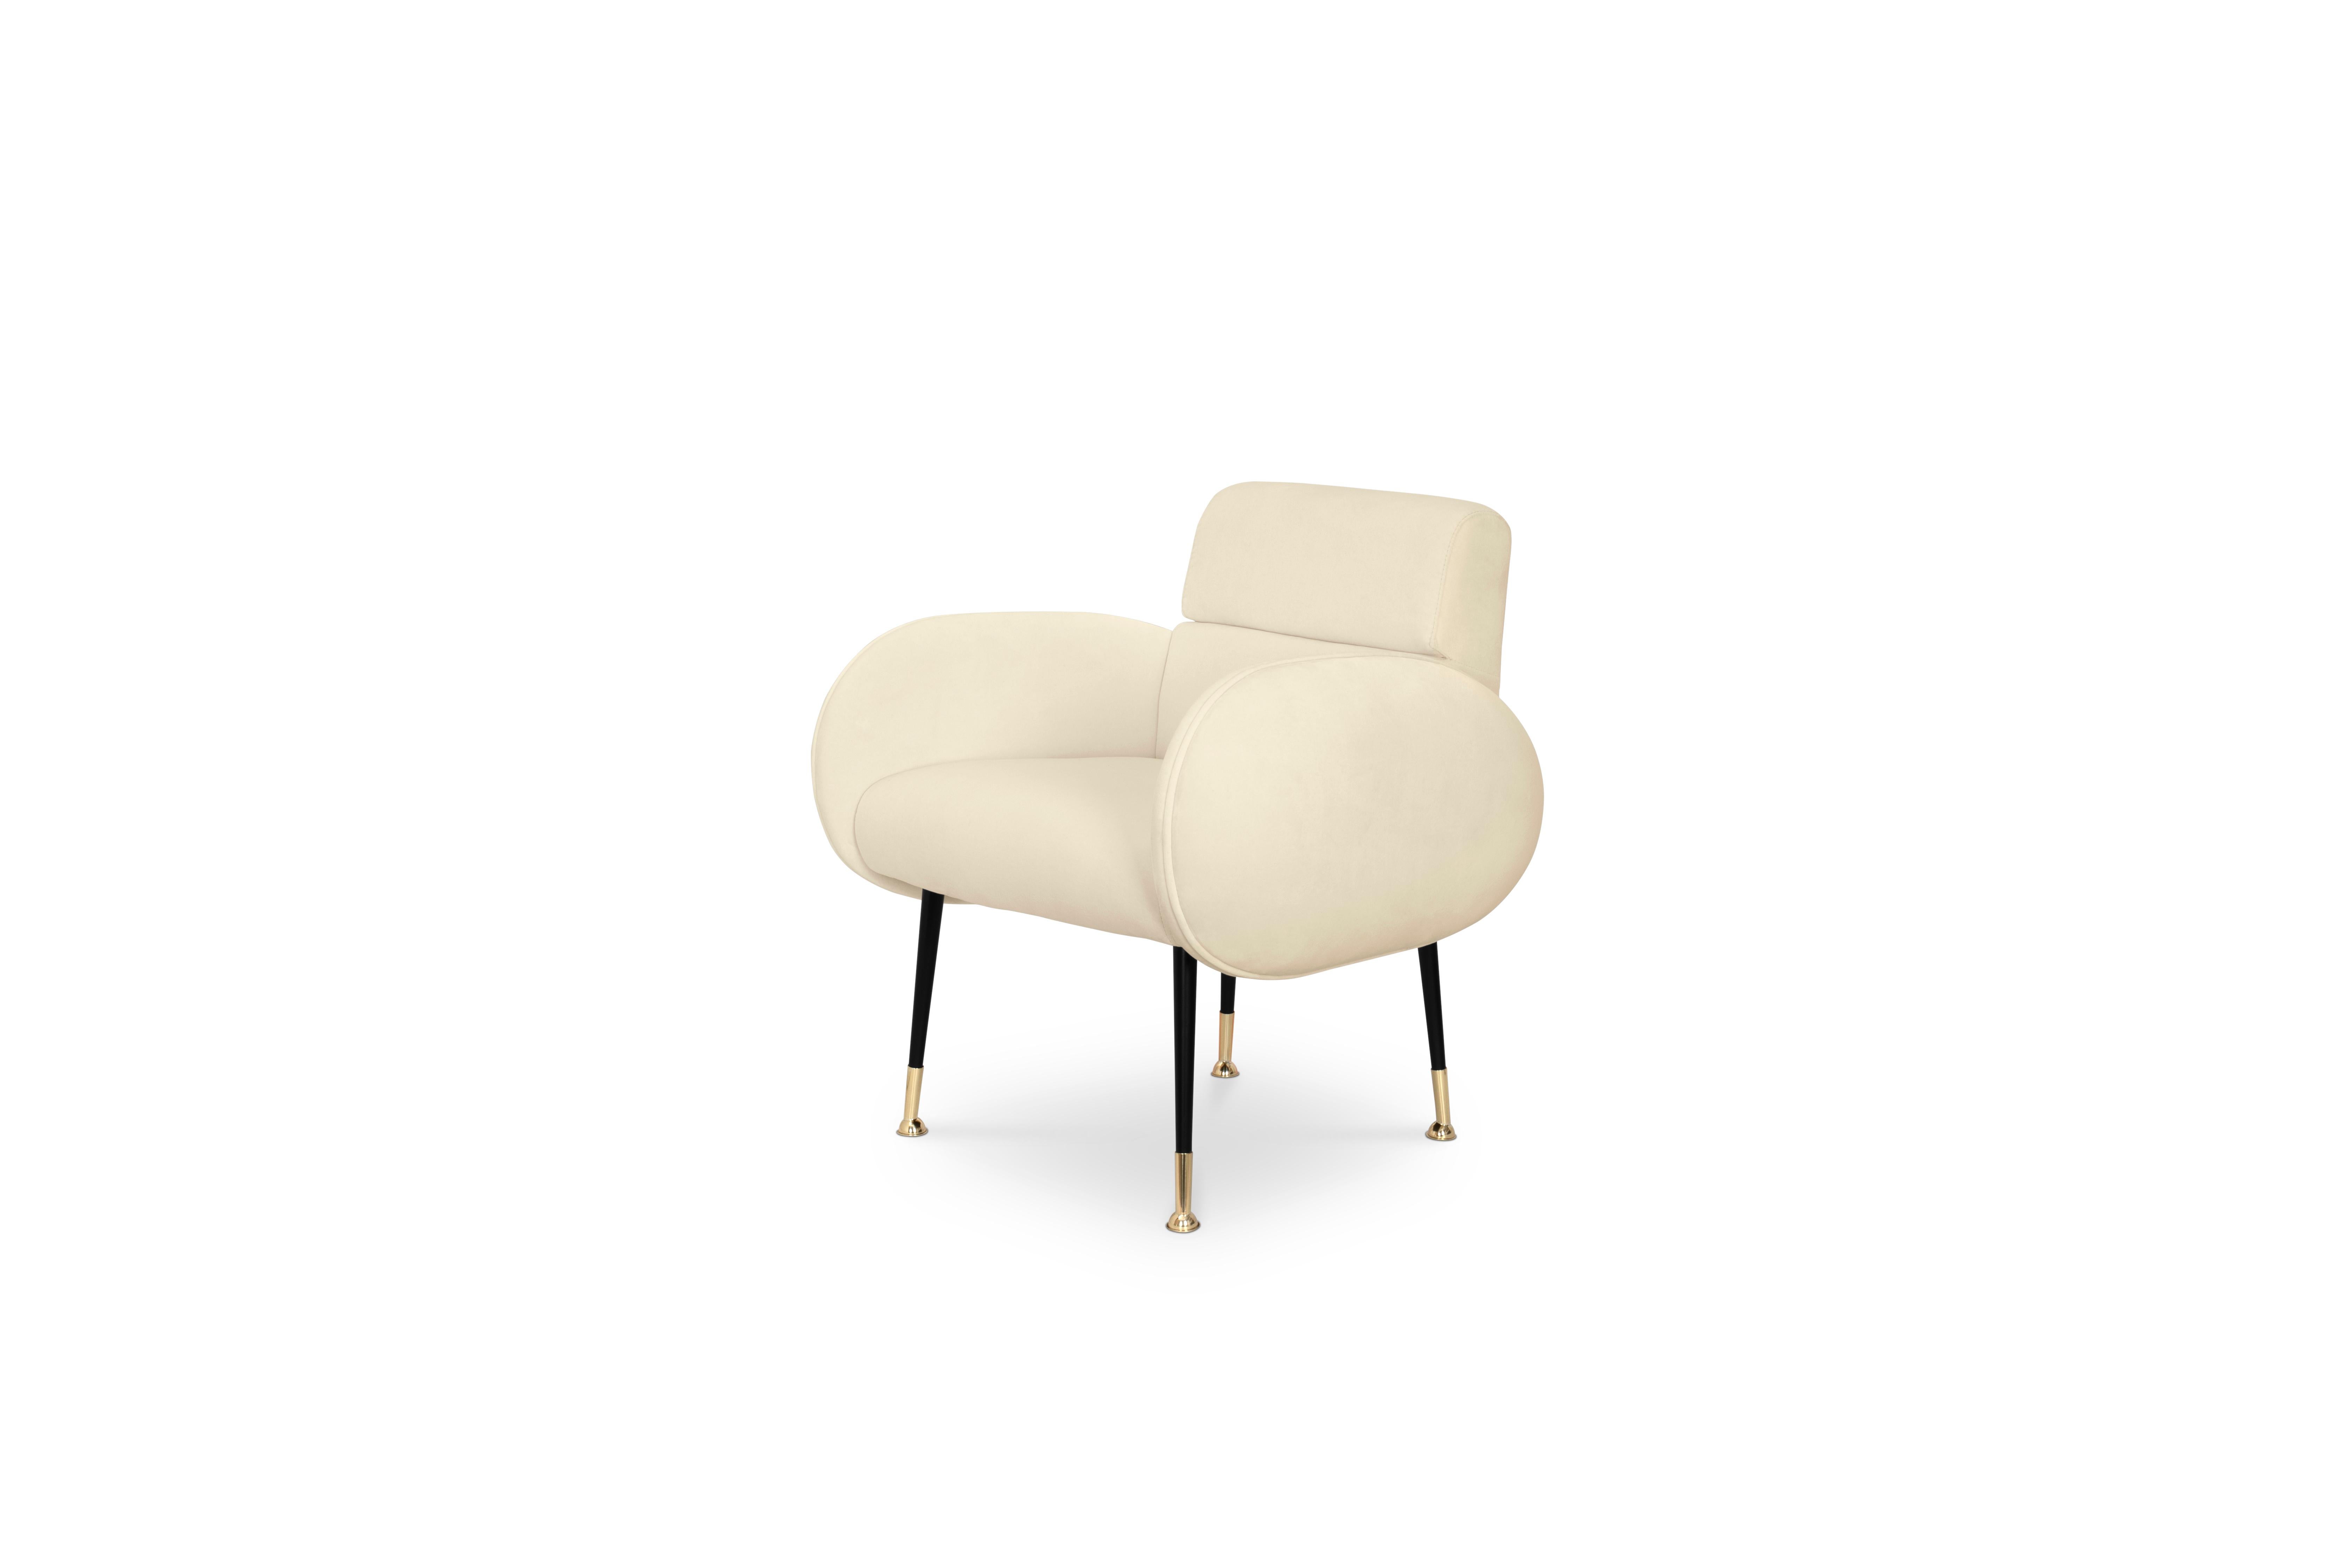 A dining chair part of the Marco collection, this mid-century piece is the ultimate chair for a luxurious dining room ready for a feast. Marco dining chair features polished brass and glossy black feet along with round shaped arms that provide even